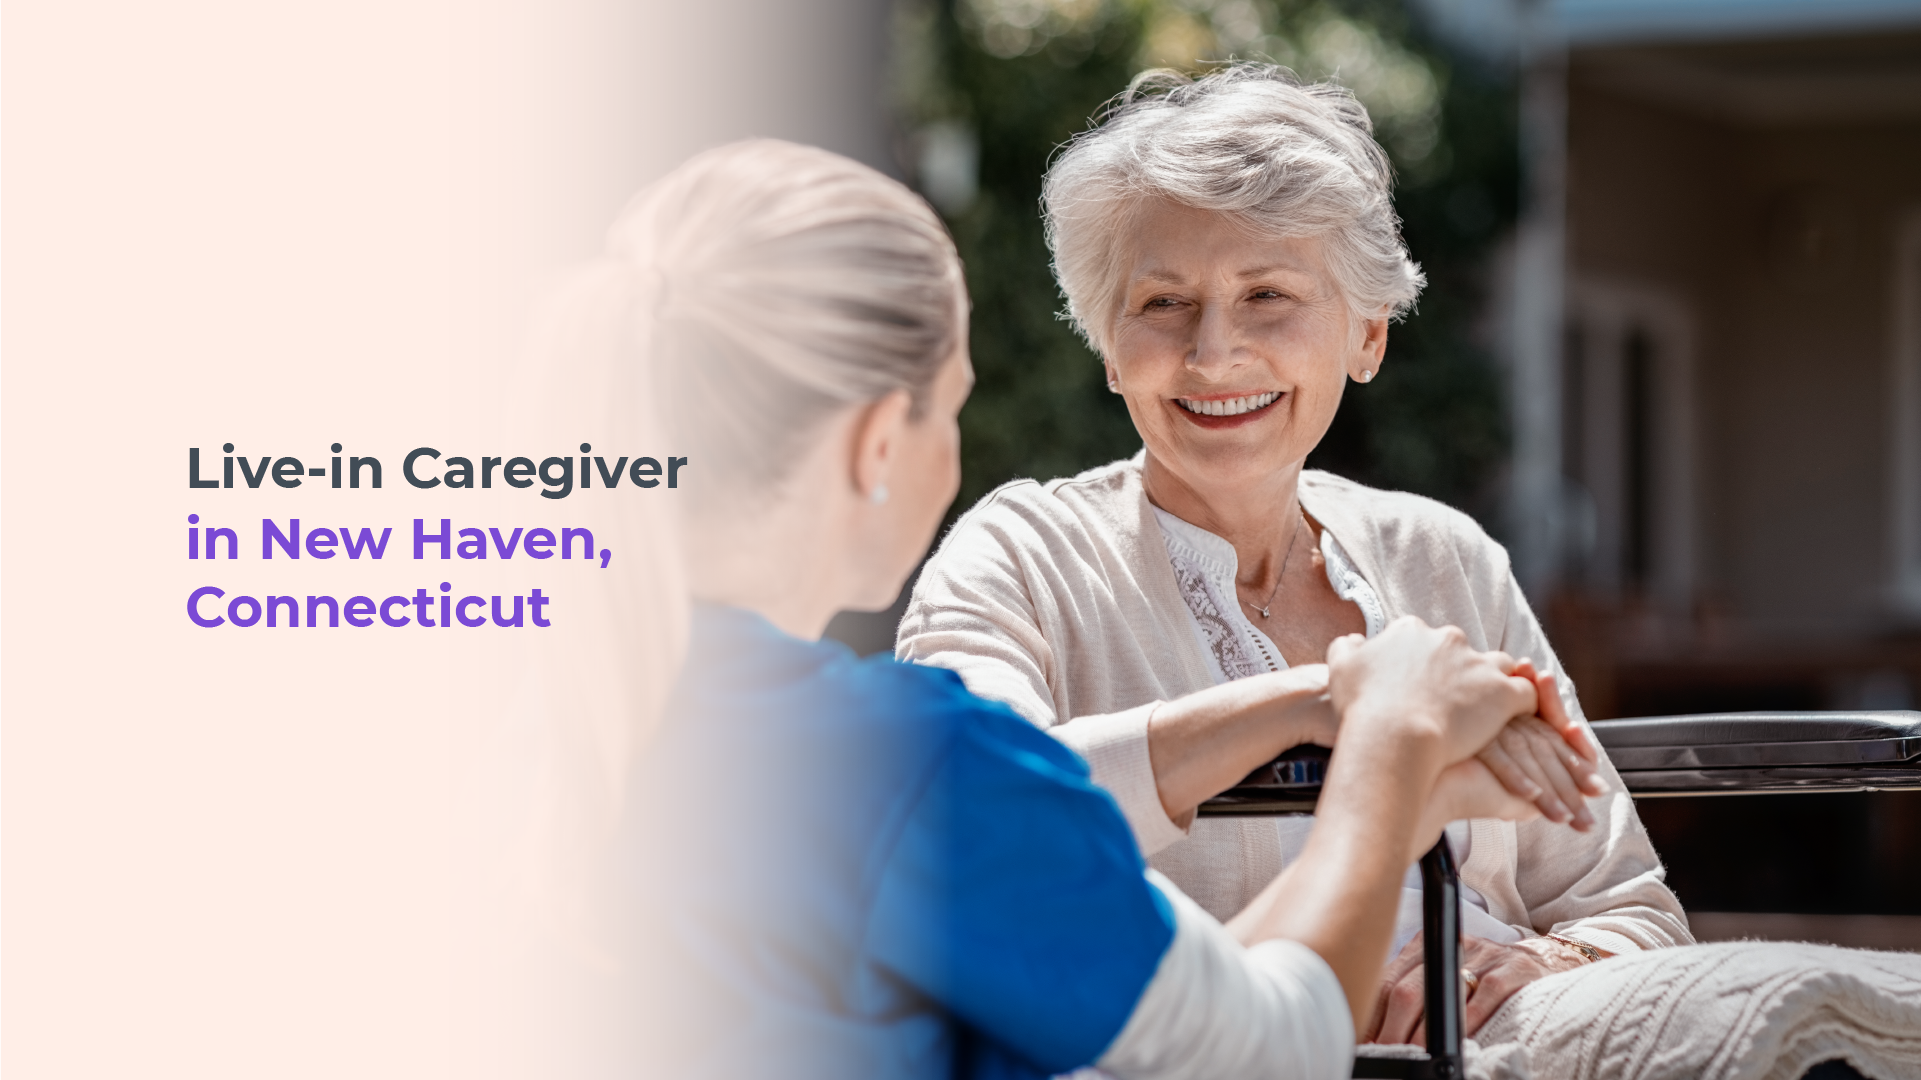 Live-in Caregivers in New Haven